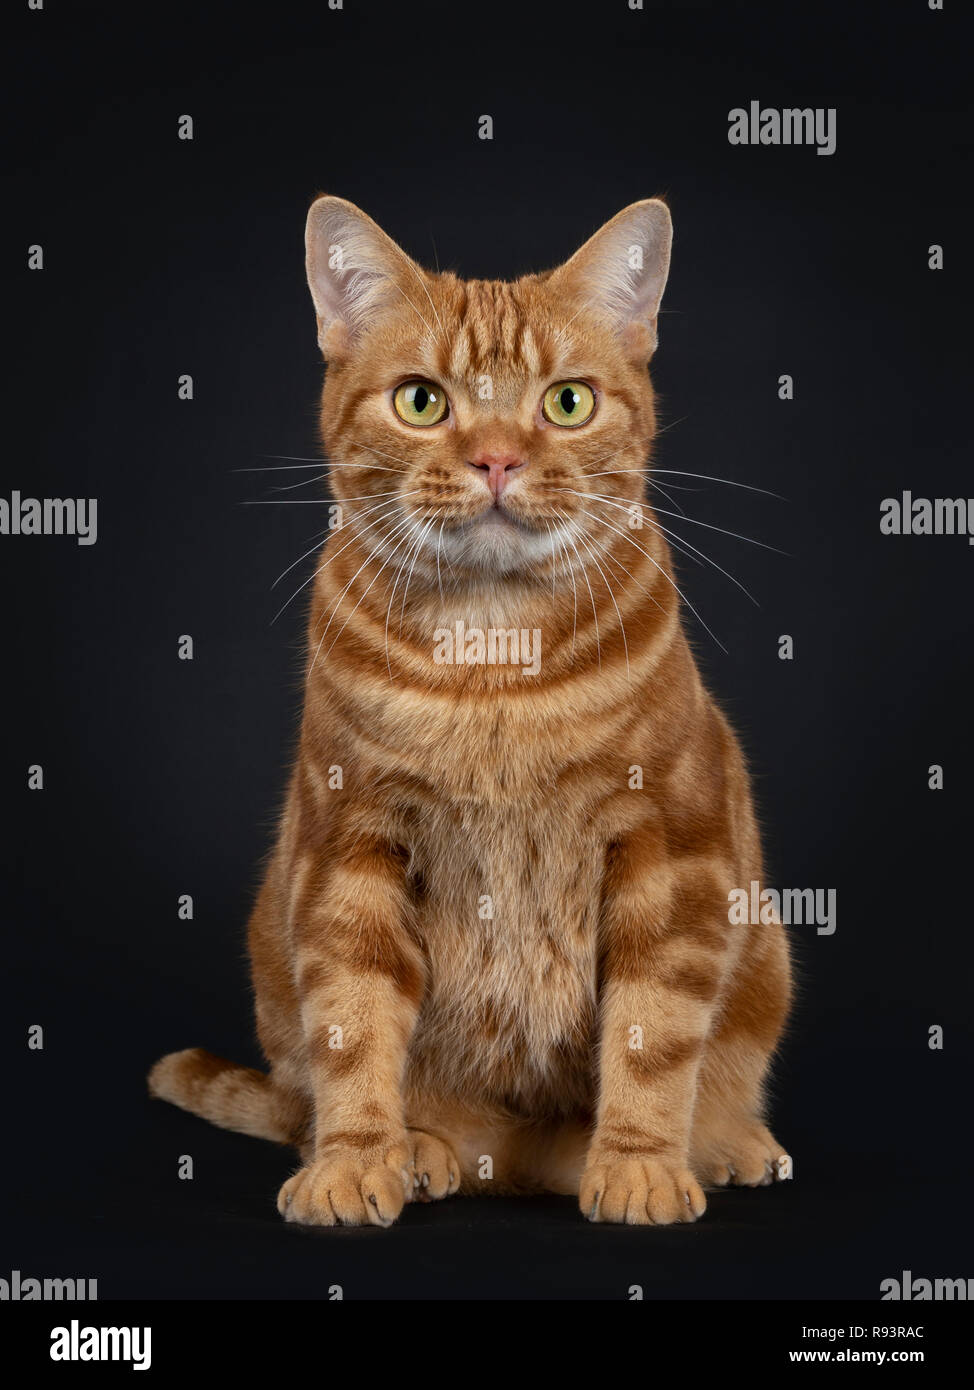 Adorable young adult red tabby American Shorthair cat, sitting straight up. Looking at lens with yellow / green eyes. Isolated on a black background. Stock Photo